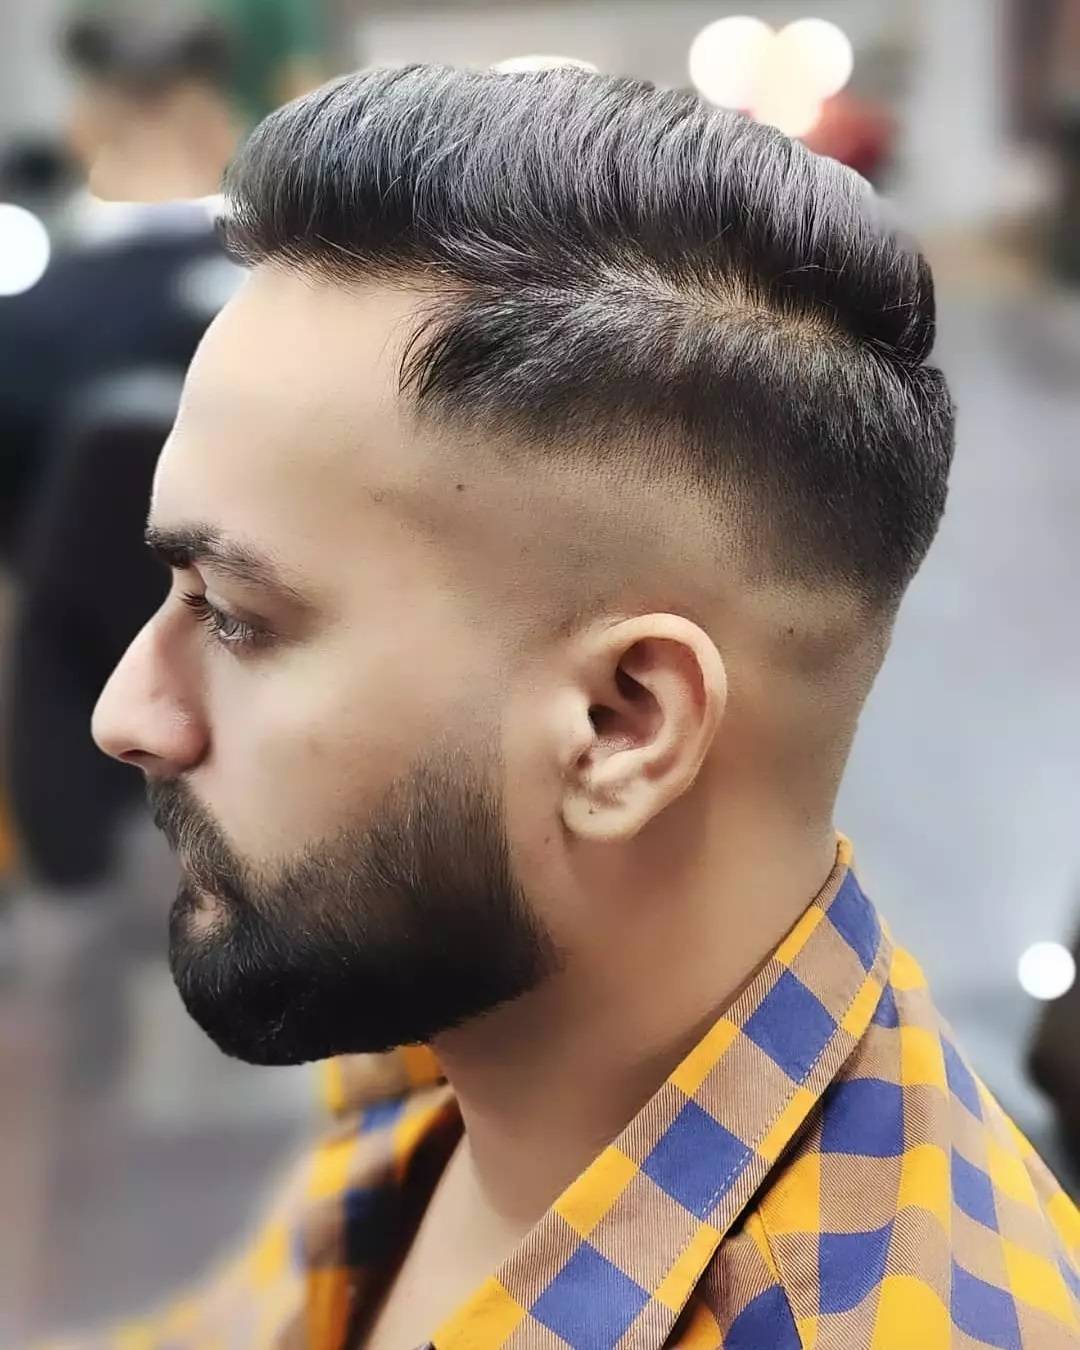 Hairstyle for Men 107 best haircut for men | haircut for men | haircuts for men Haircut for Men